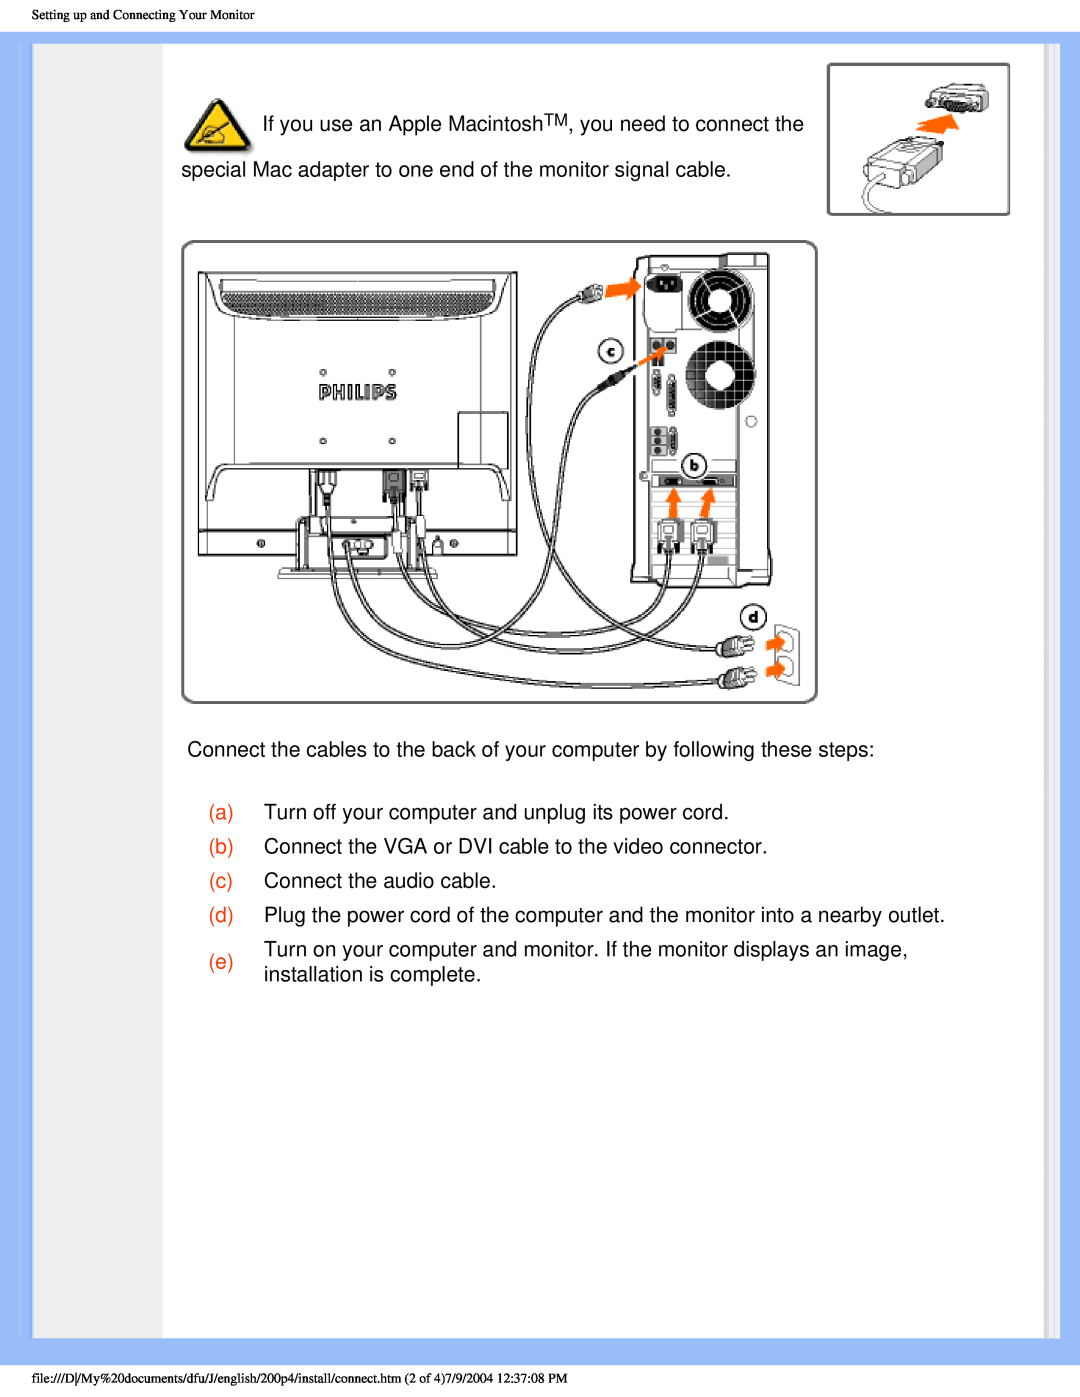 Philips 200S4 user manual aTurn off your computer and unplug its power cord 